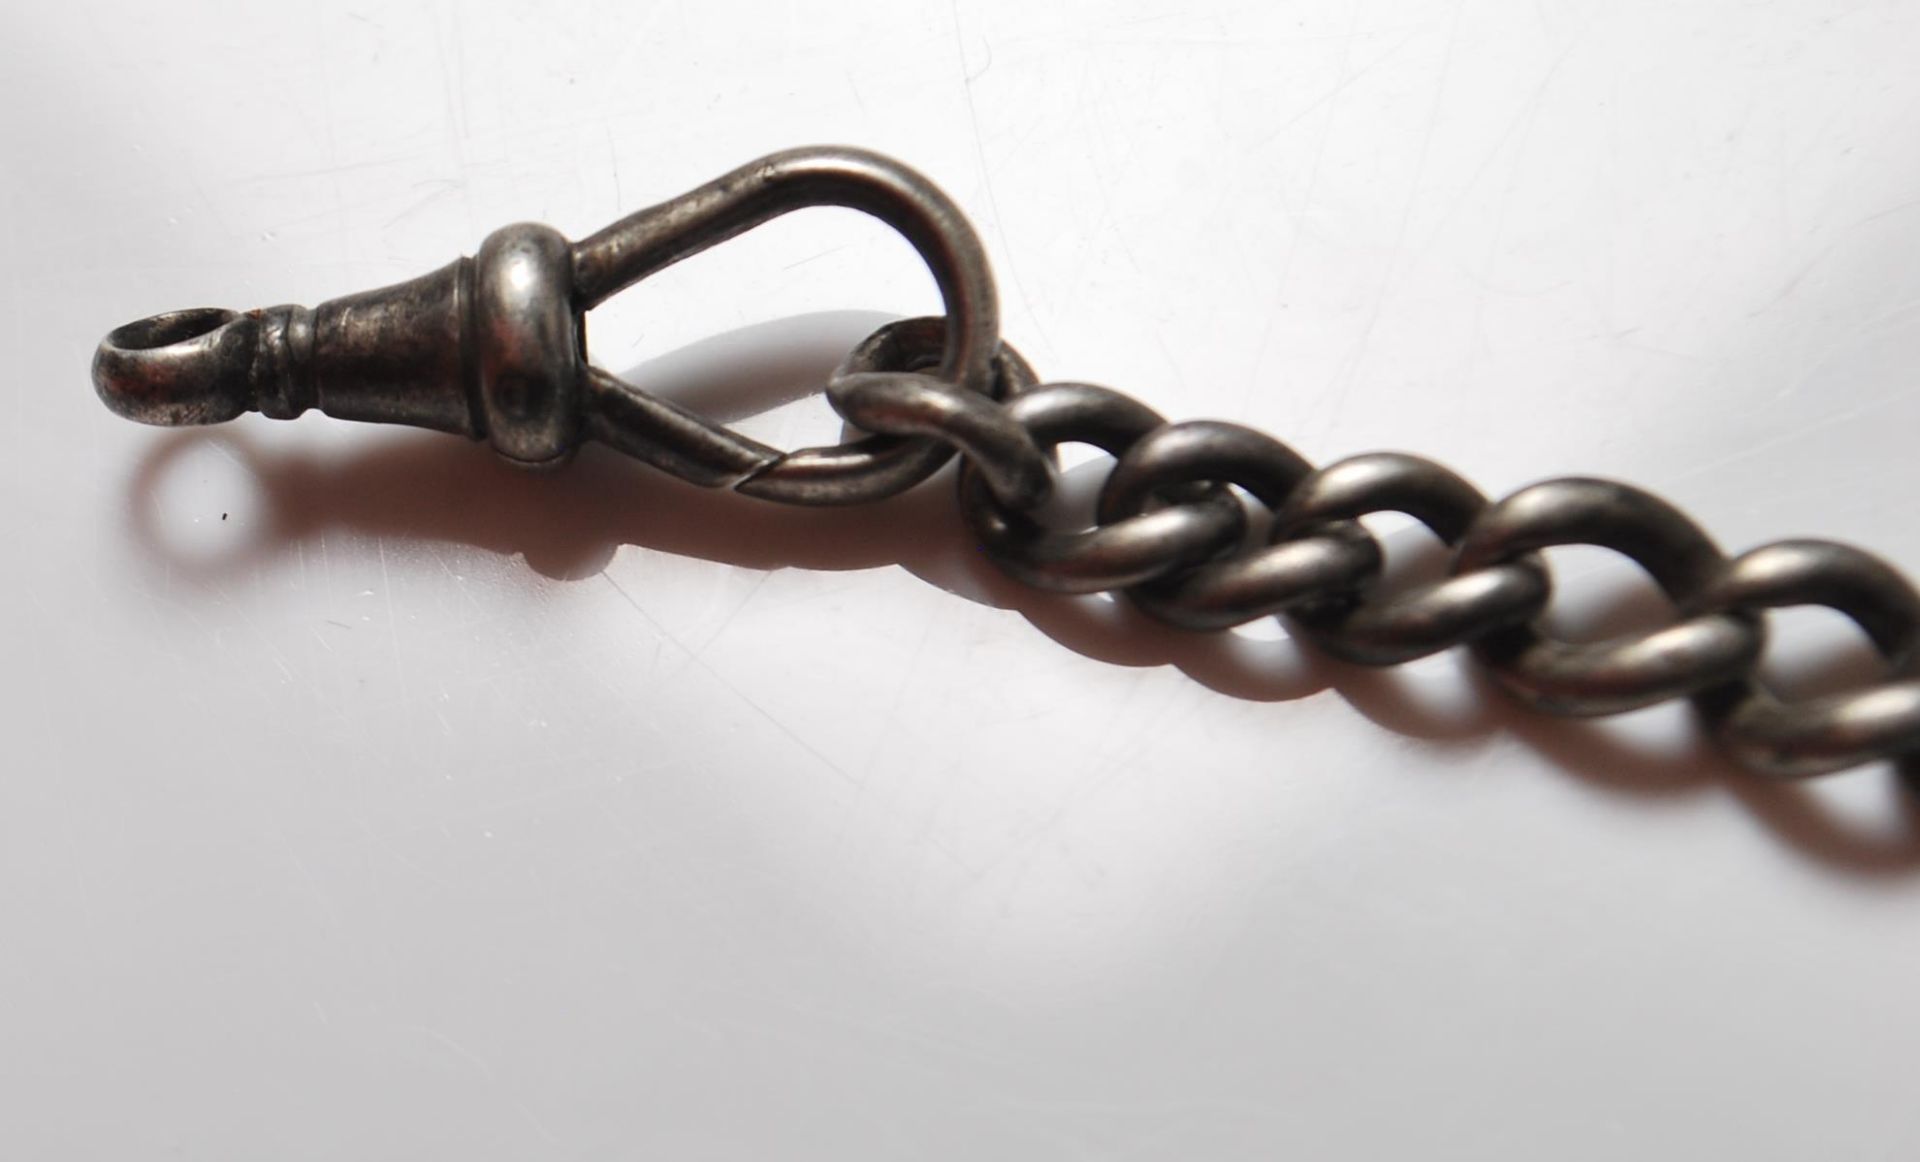 EARLY 20TH CENTURY SILVER POCKET WATCH CHAIN - Image 6 of 7